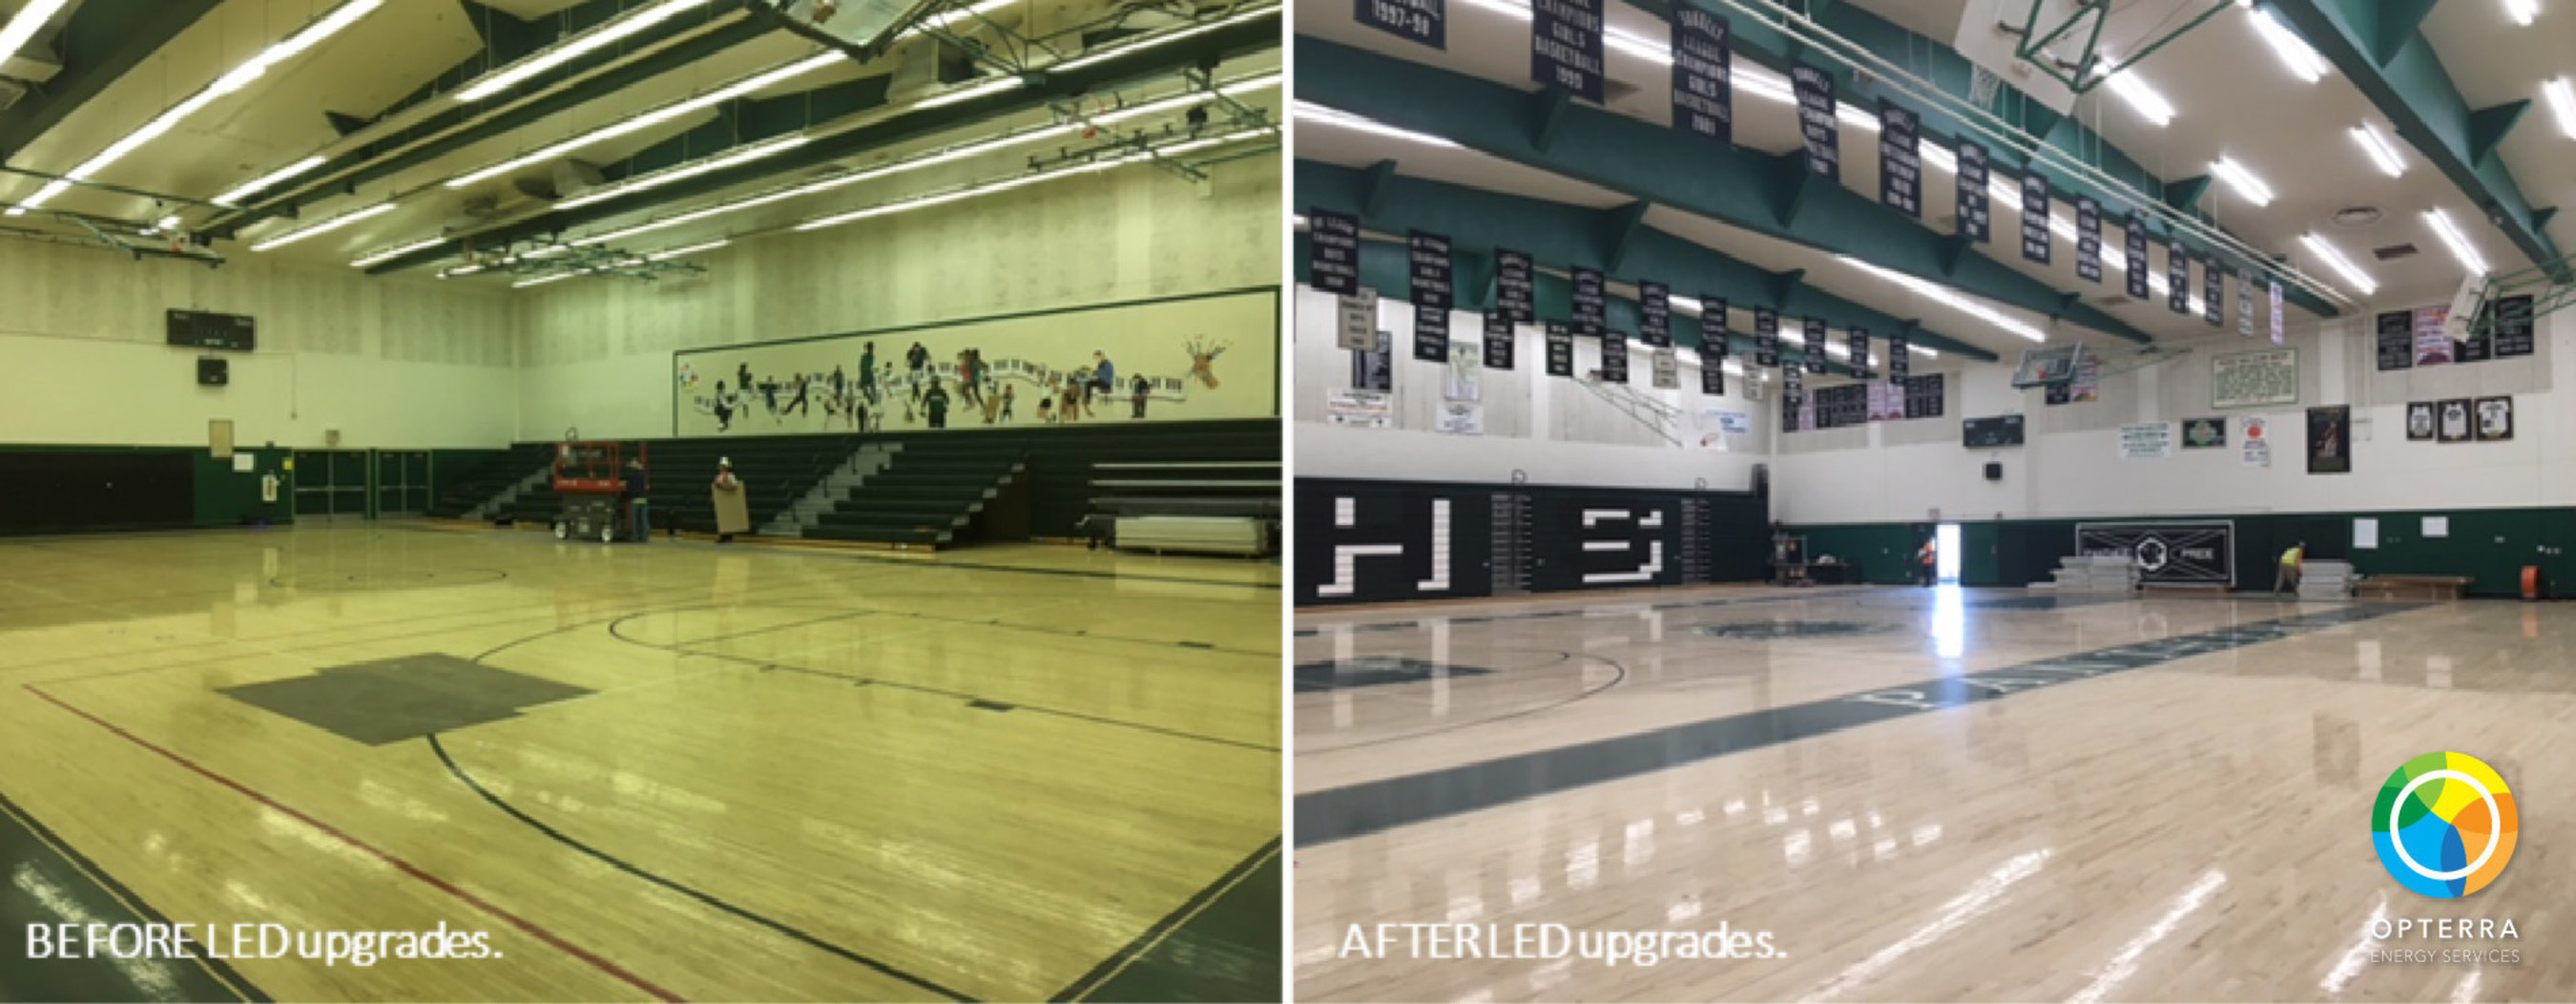 Before/after photos of an LED retrofit done by OpTerra Energy Services at Perris High Gymnasium, representative of the breadth of upgrades that La Mesa Spring Valley Schools will soon see as part of their energy program with OpTerra.